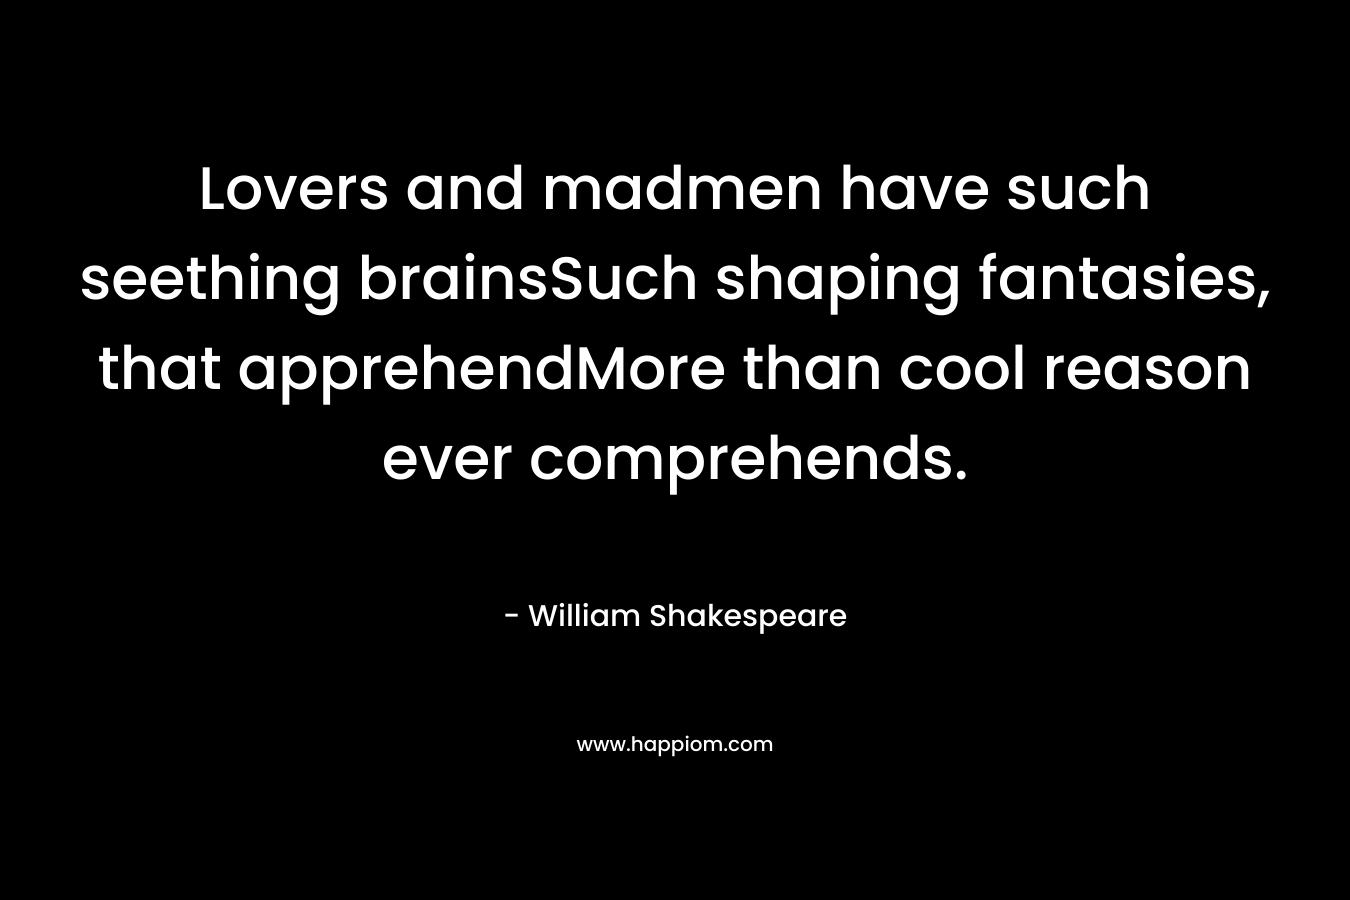 Lovers and madmen have such seething brainsSuch shaping fantasies, that apprehendMore than cool reason ever comprehends.